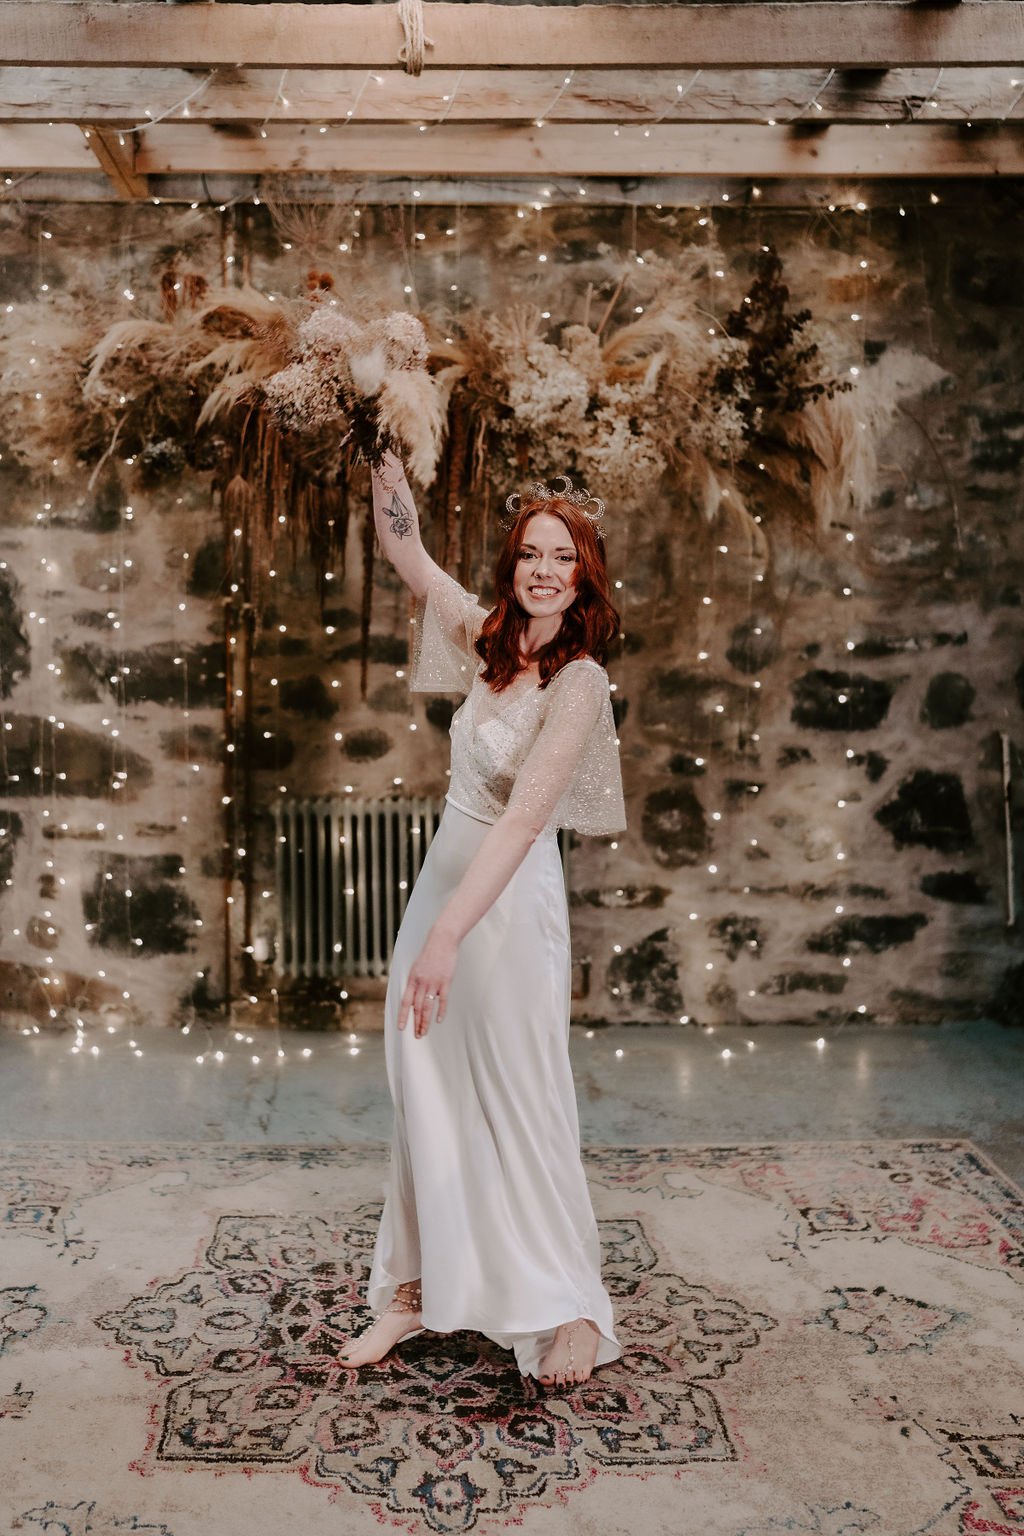 Bride is stood barefoot holding up her bridal bouquet. She is wearing a long cream sleek wedding dress with a sheer gold beaded layer over the bust and flowing into soft batwing sleeves.